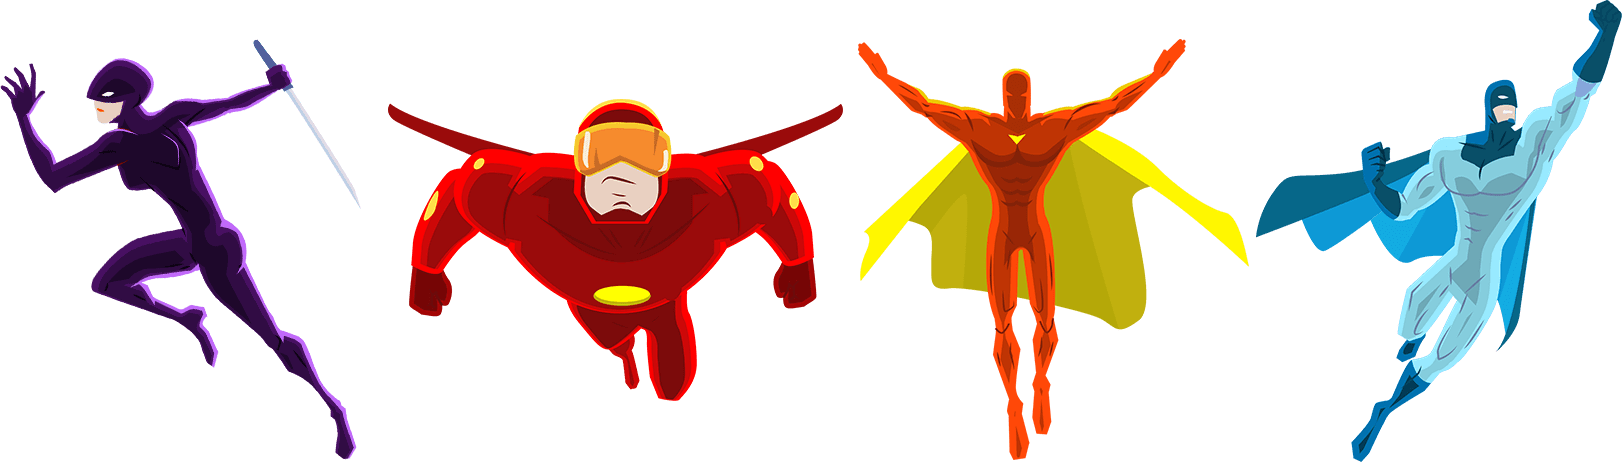 Superheroes clipart make believe. It support south yorkshire